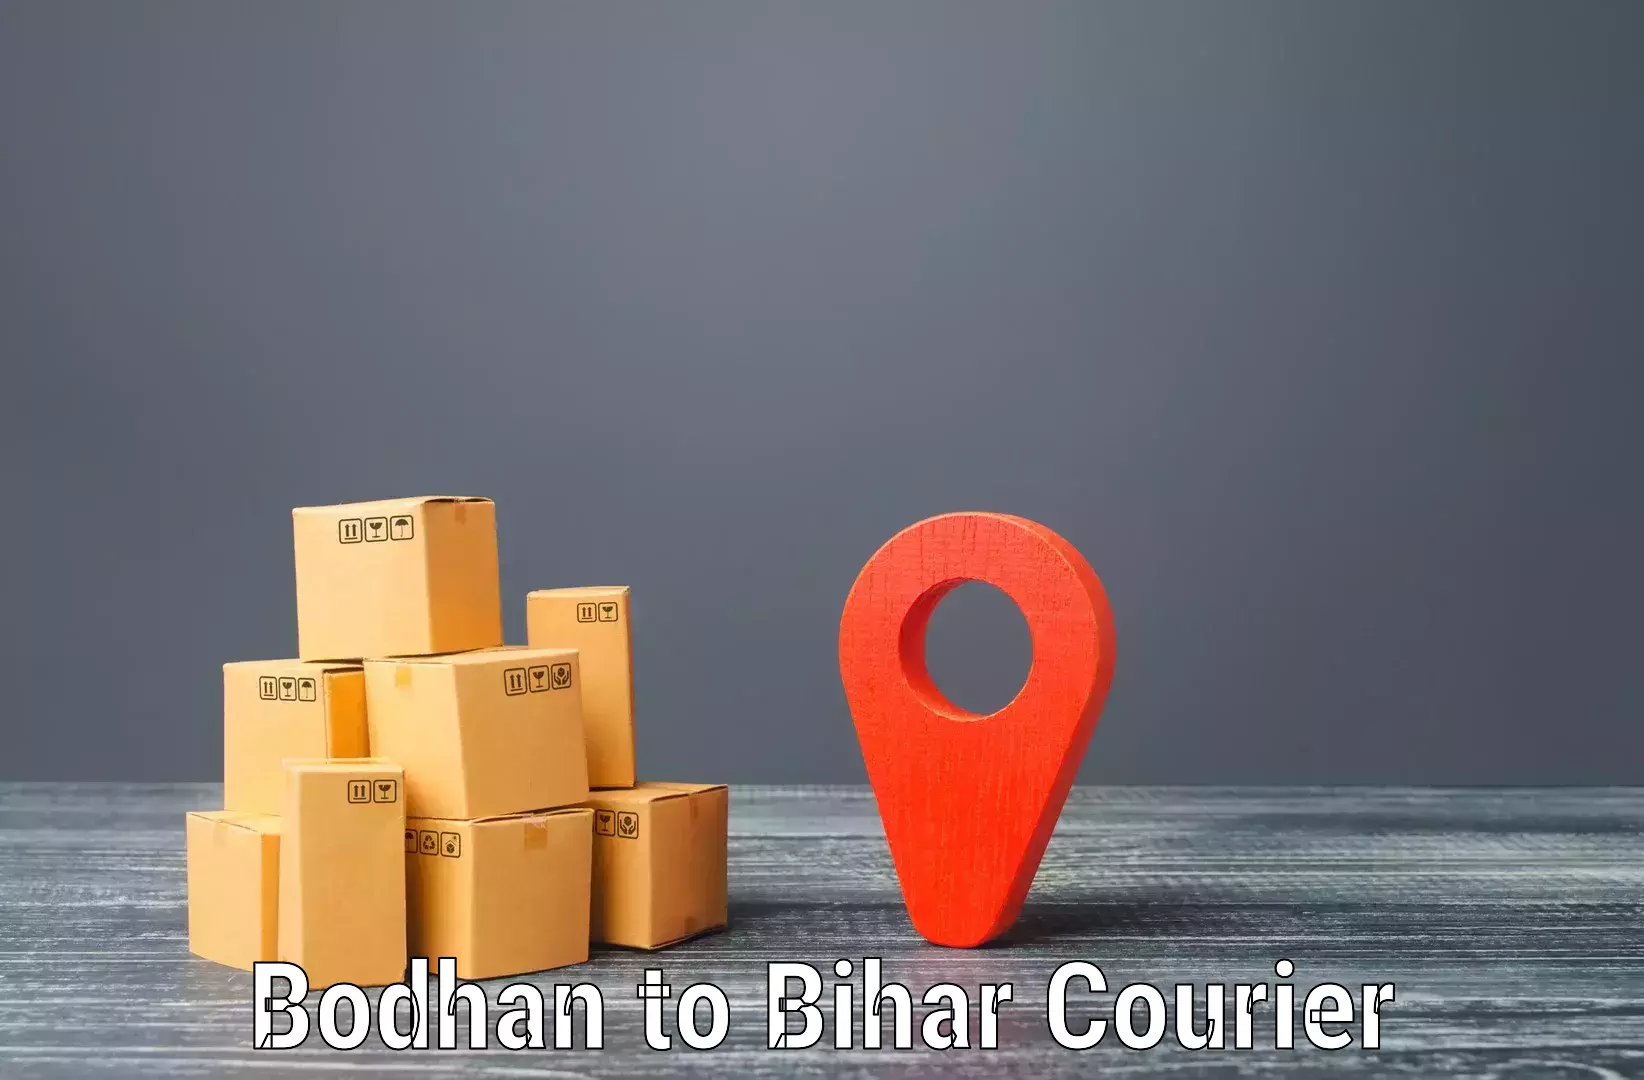 24/7 courier service in Bodhan to Manjhaul